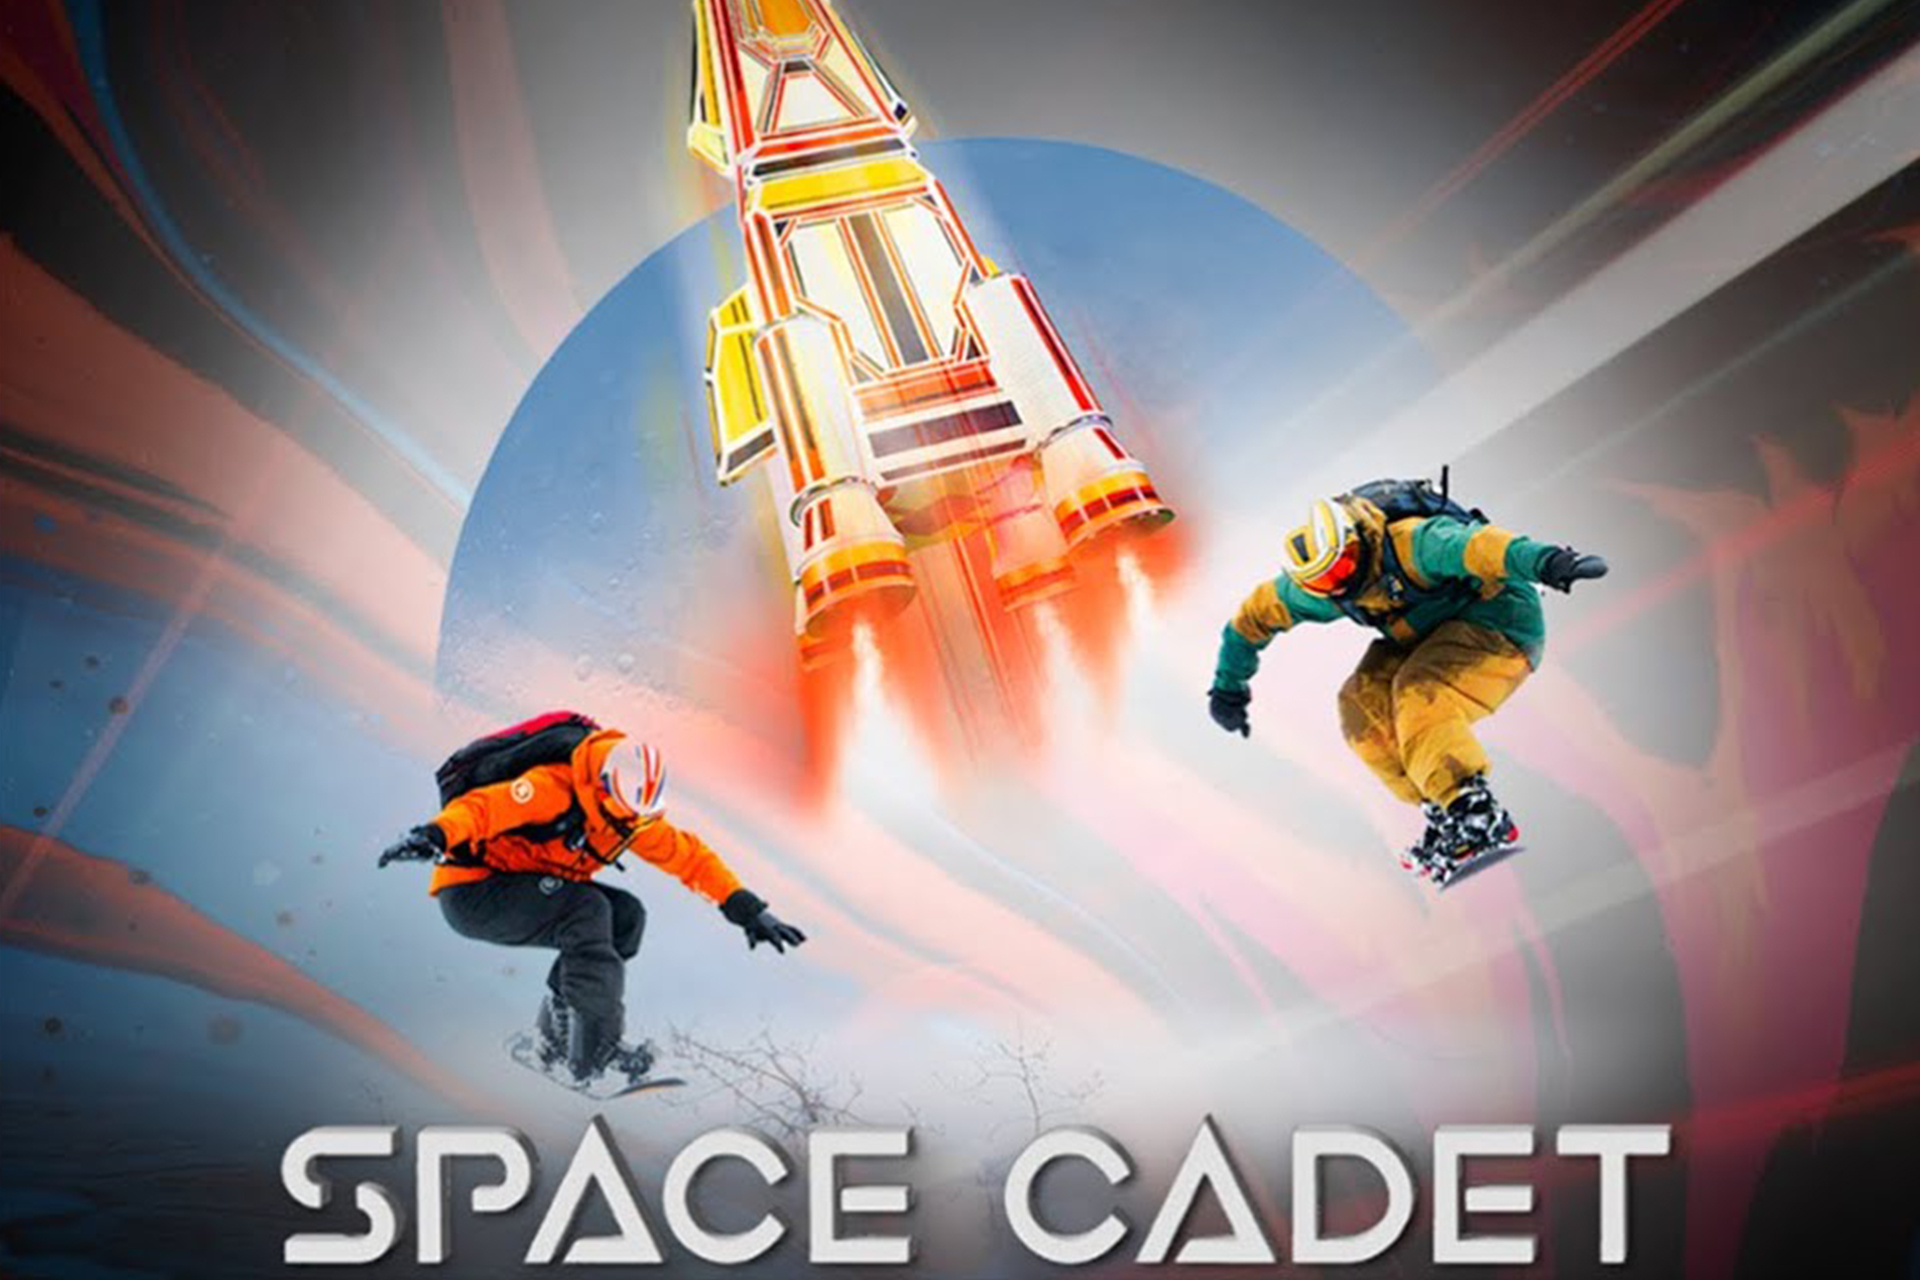 Space Cadet Full Movie Ft. Bode Merrill and Nils Mindnich Snowboard